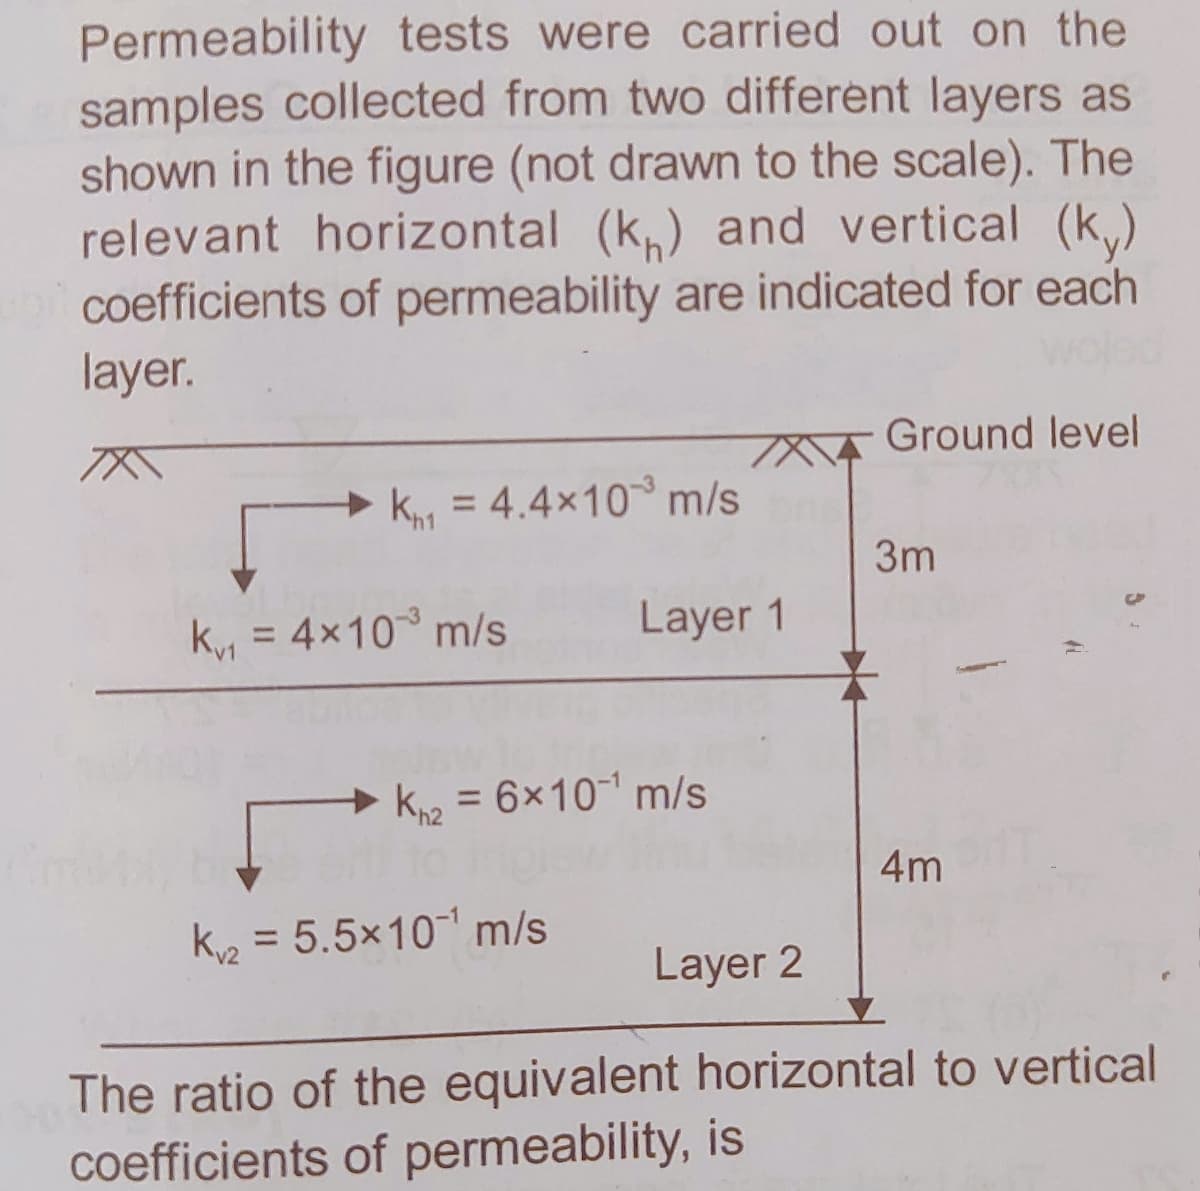 Permeability tests were carried out on the
samples collected from two different layers as
shown in the figure (not drawn to the scale). The
relevant horizontal (k.) and vertical (k,)
coefficients of permeability are indicated for each
layer.
Ground level
+ k = 4.4x10° m/s
3m
ky = 4x10 m/s
Layer 1
%3D
> Kn2
= 6x10 m/s
4m
k, = 5.5x10 m/s
Layer 2
The ratio of the equivalent horizontal to vertical
coefficients of permeability, is
